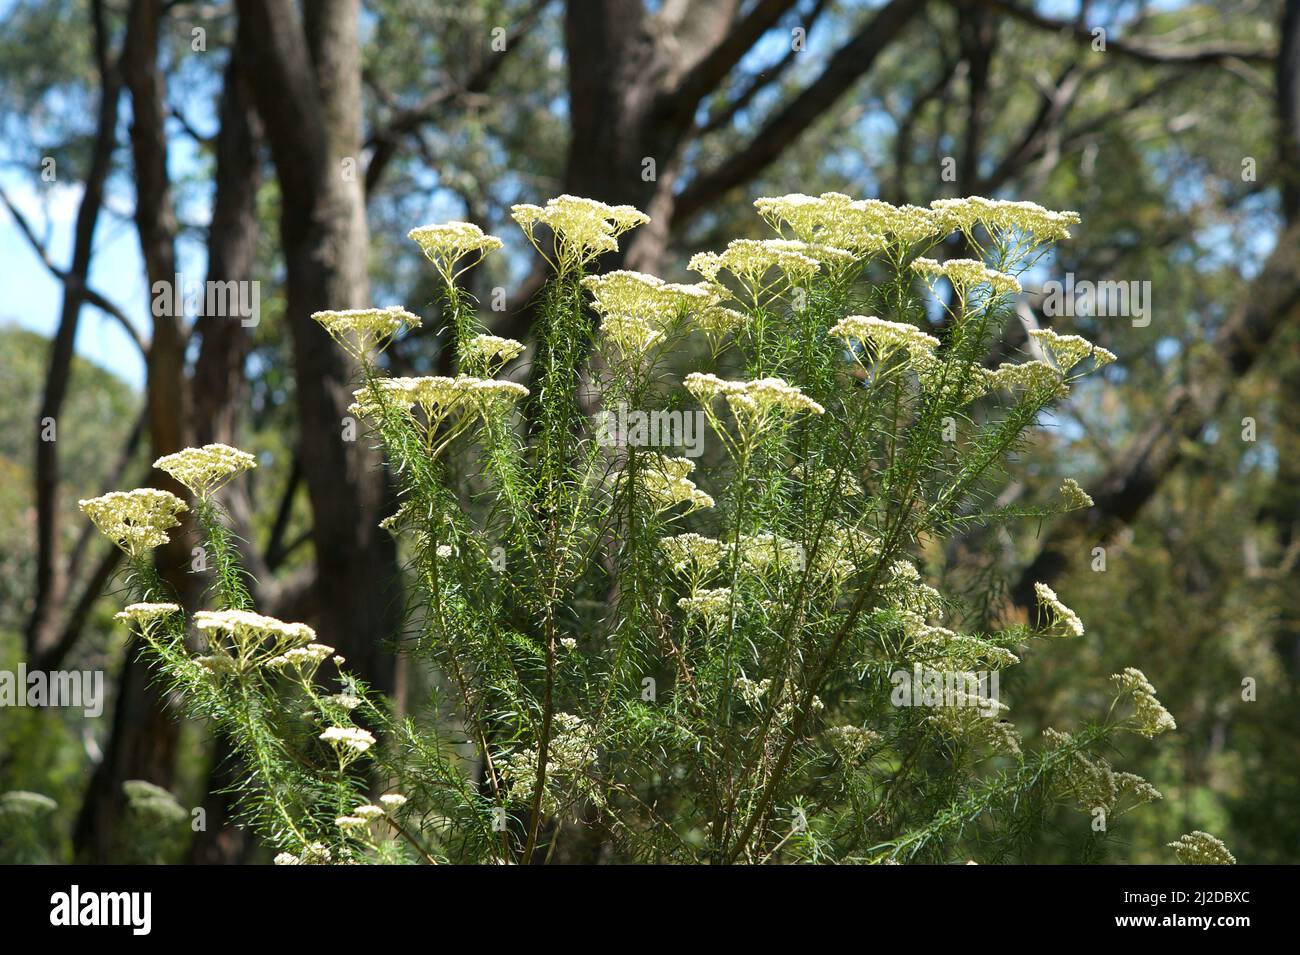 Dogwood is one of the most common plants in Australia. This is Shiny Dogwood (Cassinia Longifolia), which has longer leaves than Common Dogwood. Stock Photo